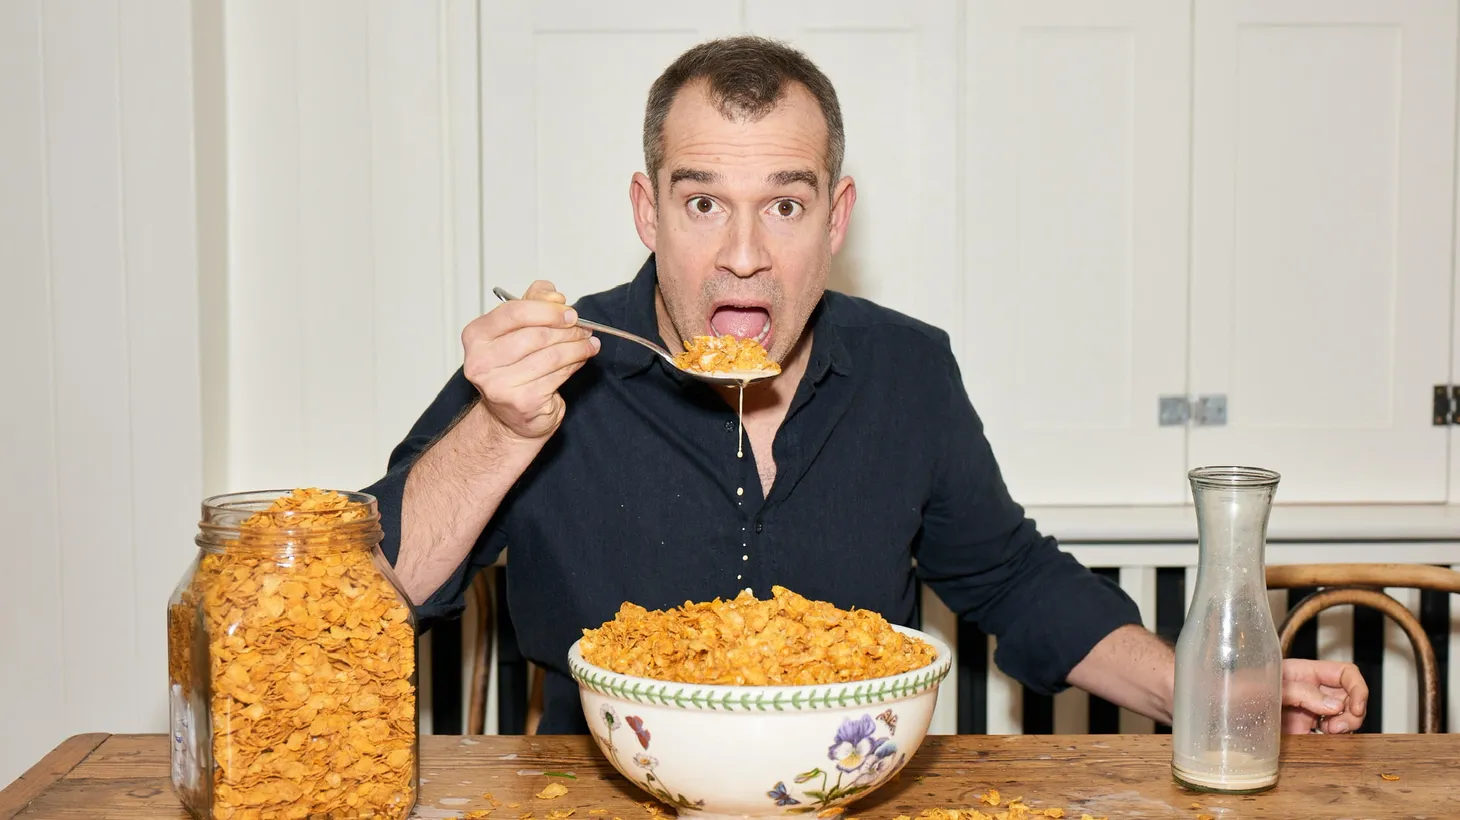 Chris van Tulleken ate a diet of 80% ultra-processed food for a month to acquire pilot data for a study in partnership with his colleagues at the University College London.